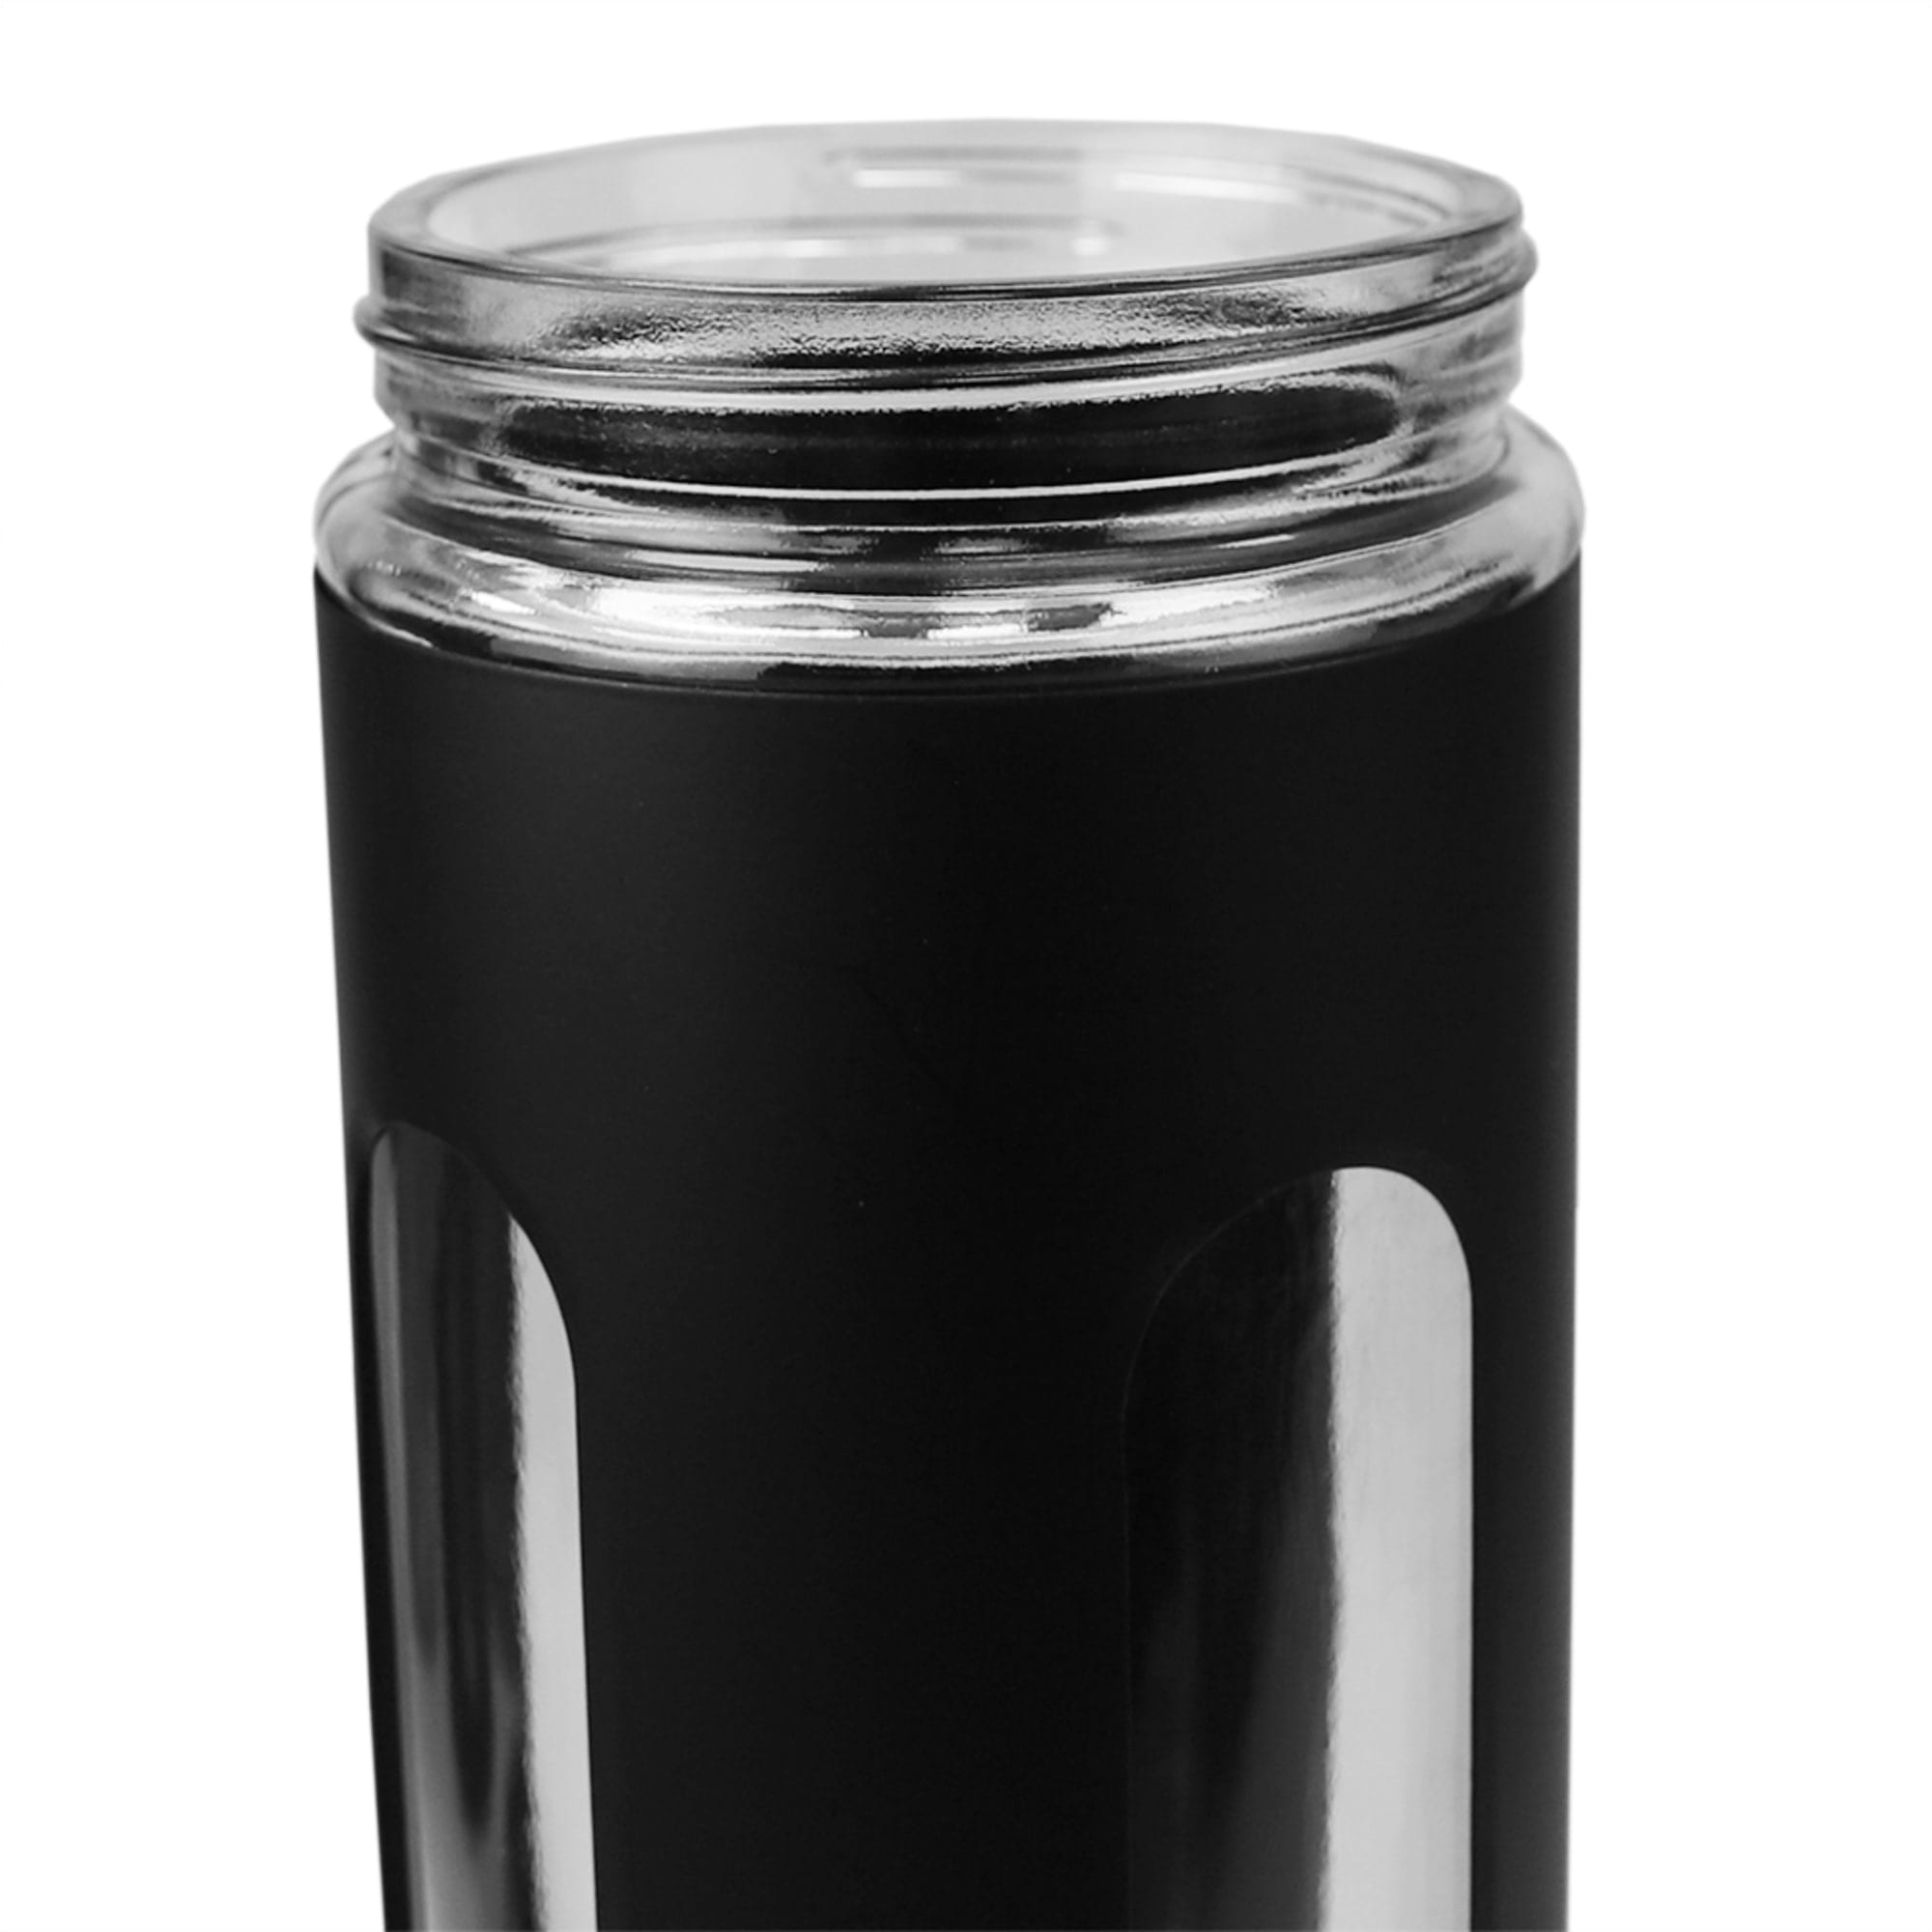 Home Basics 4 Piece Metal Canisters with Multiple Peek-Through Windows, Black $12.00 EACH, CASE PACK OF 4